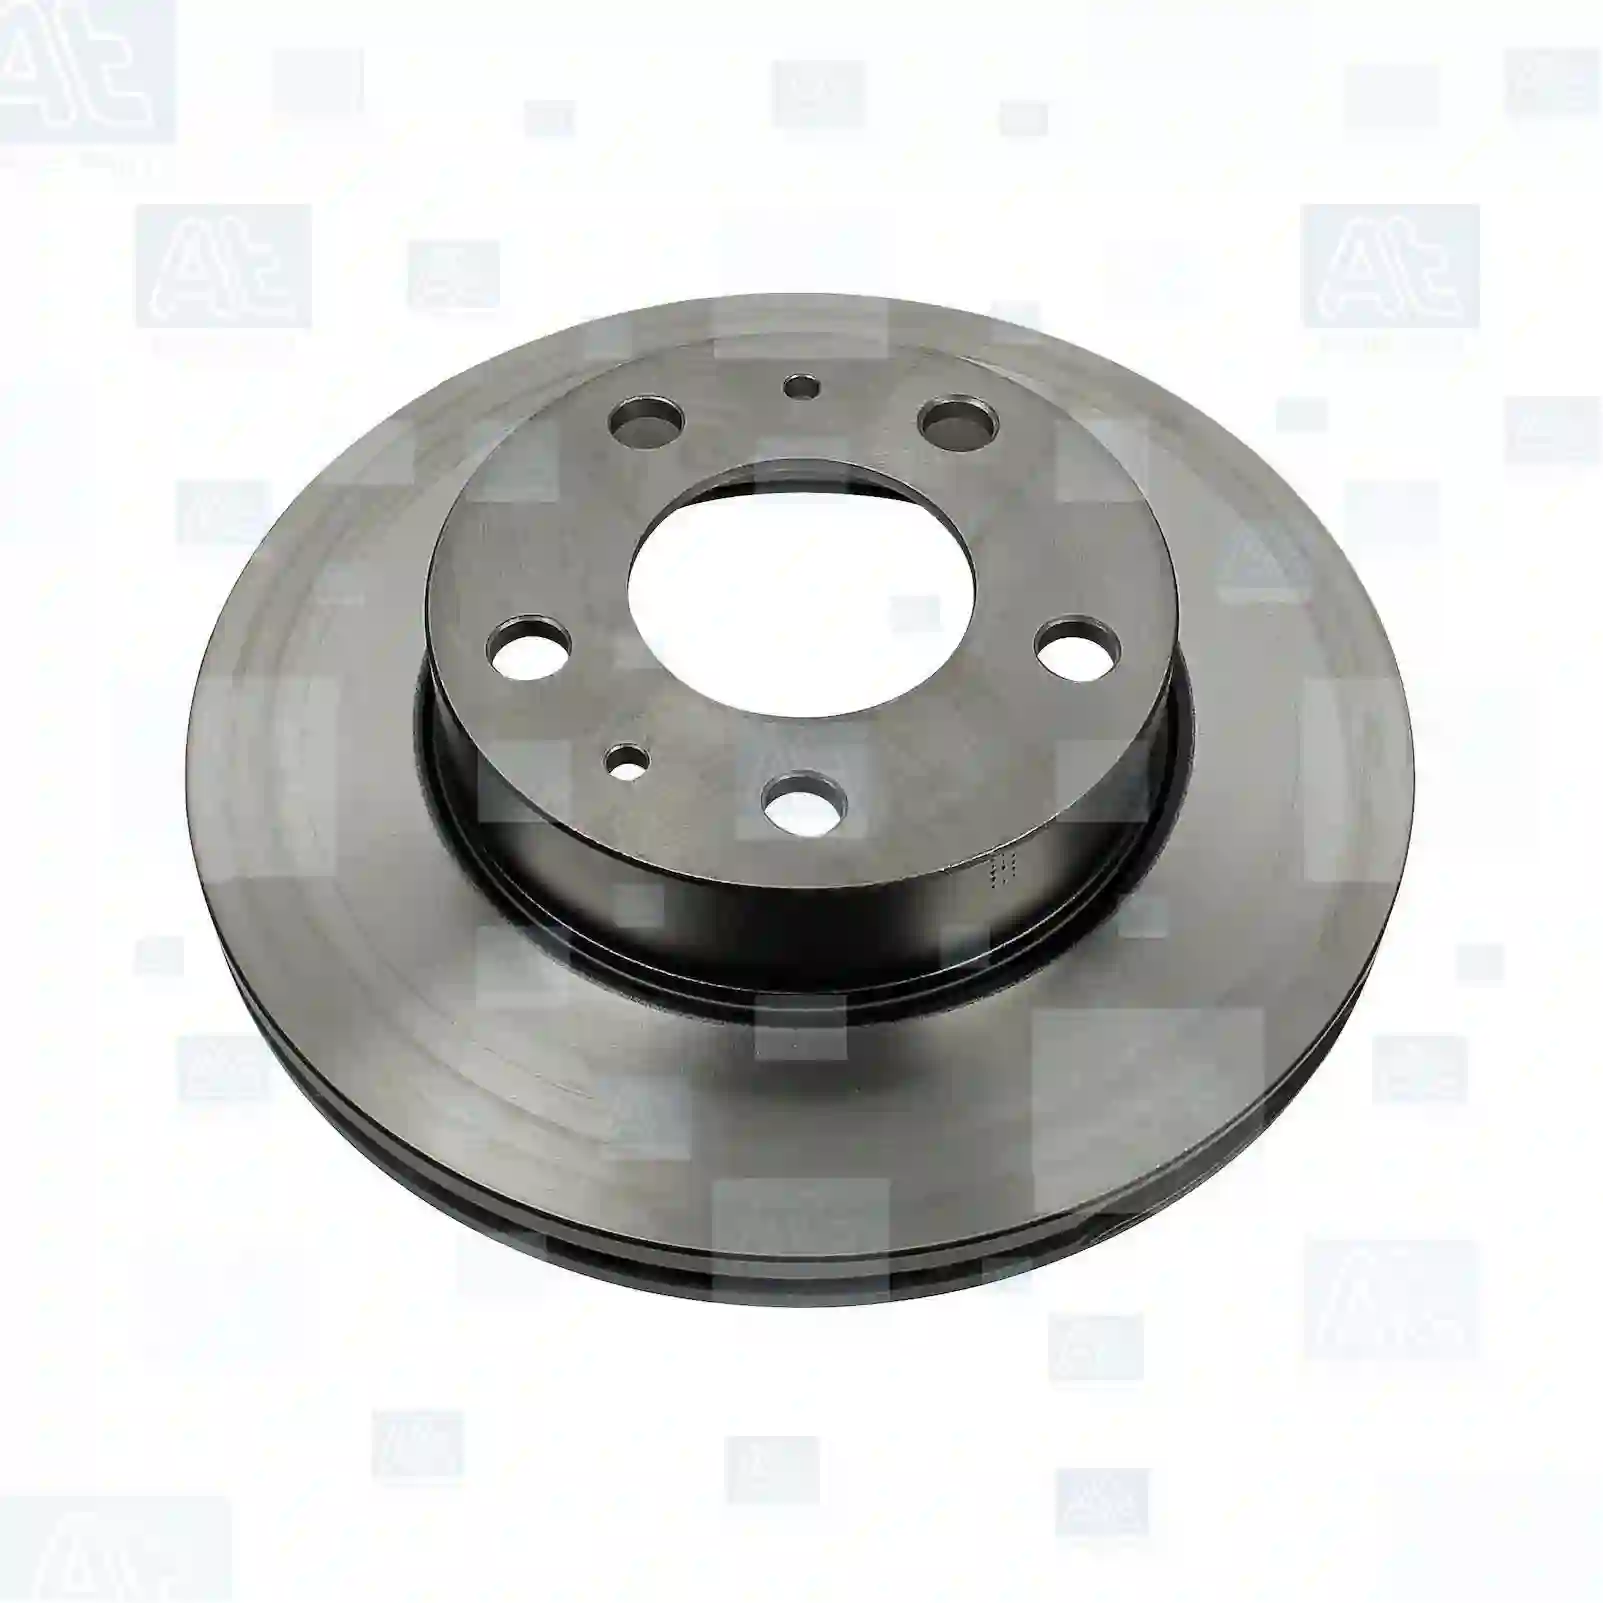 Brake disc, 77714736, 00004246Y3, 1606400780, 1606401680, 1607872280, 1611841680, 4246K2, 4246K3, 4246Y3, 4246Y5, 424935, 424936, 4249A0, 4249E3, 4249G5, 4249H2, 4249H9, 1307356080, 1341045080, 46806234, 51728378, 51740247, 51858362, 51858363, 71739637, 00004246Y3, 1606400780, 1606401680, 1607872280, 1611841680, 4246K2, 4246K3, 4246Y3, 4246Y5, 424935, 424936, 4249A0, 4249E3, 4249G5, 4249H2, 4249H9 ||  77714736 At Spare Part | Engine, Accelerator Pedal, Camshaft, Connecting Rod, Crankcase, Crankshaft, Cylinder Head, Engine Suspension Mountings, Exhaust Manifold, Exhaust Gas Recirculation, Filter Kits, Flywheel Housing, General Overhaul Kits, Engine, Intake Manifold, Oil Cleaner, Oil Cooler, Oil Filter, Oil Pump, Oil Sump, Piston & Liner, Sensor & Switch, Timing Case, Turbocharger, Cooling System, Belt Tensioner, Coolant Filter, Coolant Pipe, Corrosion Prevention Agent, Drive, Expansion Tank, Fan, Intercooler, Monitors & Gauges, Radiator, Thermostat, V-Belt / Timing belt, Water Pump, Fuel System, Electronical Injector Unit, Feed Pump, Fuel Filter, cpl., Fuel Gauge Sender,  Fuel Line, Fuel Pump, Fuel Tank, Injection Line Kit, Injection Pump, Exhaust System, Clutch & Pedal, Gearbox, Propeller Shaft, Axles, Brake System, Hubs & Wheels, Suspension, Leaf Spring, Universal Parts / Accessories, Steering, Electrical System, Cabin Brake disc, 77714736, 00004246Y3, 1606400780, 1606401680, 1607872280, 1611841680, 4246K2, 4246K3, 4246Y3, 4246Y5, 424935, 424936, 4249A0, 4249E3, 4249G5, 4249H2, 4249H9, 1307356080, 1341045080, 46806234, 51728378, 51740247, 51858362, 51858363, 71739637, 00004246Y3, 1606400780, 1606401680, 1607872280, 1611841680, 4246K2, 4246K3, 4246Y3, 4246Y5, 424935, 424936, 4249A0, 4249E3, 4249G5, 4249H2, 4249H9 ||  77714736 At Spare Part | Engine, Accelerator Pedal, Camshaft, Connecting Rod, Crankcase, Crankshaft, Cylinder Head, Engine Suspension Mountings, Exhaust Manifold, Exhaust Gas Recirculation, Filter Kits, Flywheel Housing, General Overhaul Kits, Engine, Intake Manifold, Oil Cleaner, Oil Cooler, Oil Filter, Oil Pump, Oil Sump, Piston & Liner, Sensor & Switch, Timing Case, Turbocharger, Cooling System, Belt Tensioner, Coolant Filter, Coolant Pipe, Corrosion Prevention Agent, Drive, Expansion Tank, Fan, Intercooler, Monitors & Gauges, Radiator, Thermostat, V-Belt / Timing belt, Water Pump, Fuel System, Electronical Injector Unit, Feed Pump, Fuel Filter, cpl., Fuel Gauge Sender,  Fuel Line, Fuel Pump, Fuel Tank, Injection Line Kit, Injection Pump, Exhaust System, Clutch & Pedal, Gearbox, Propeller Shaft, Axles, Brake System, Hubs & Wheels, Suspension, Leaf Spring, Universal Parts / Accessories, Steering, Electrical System, Cabin